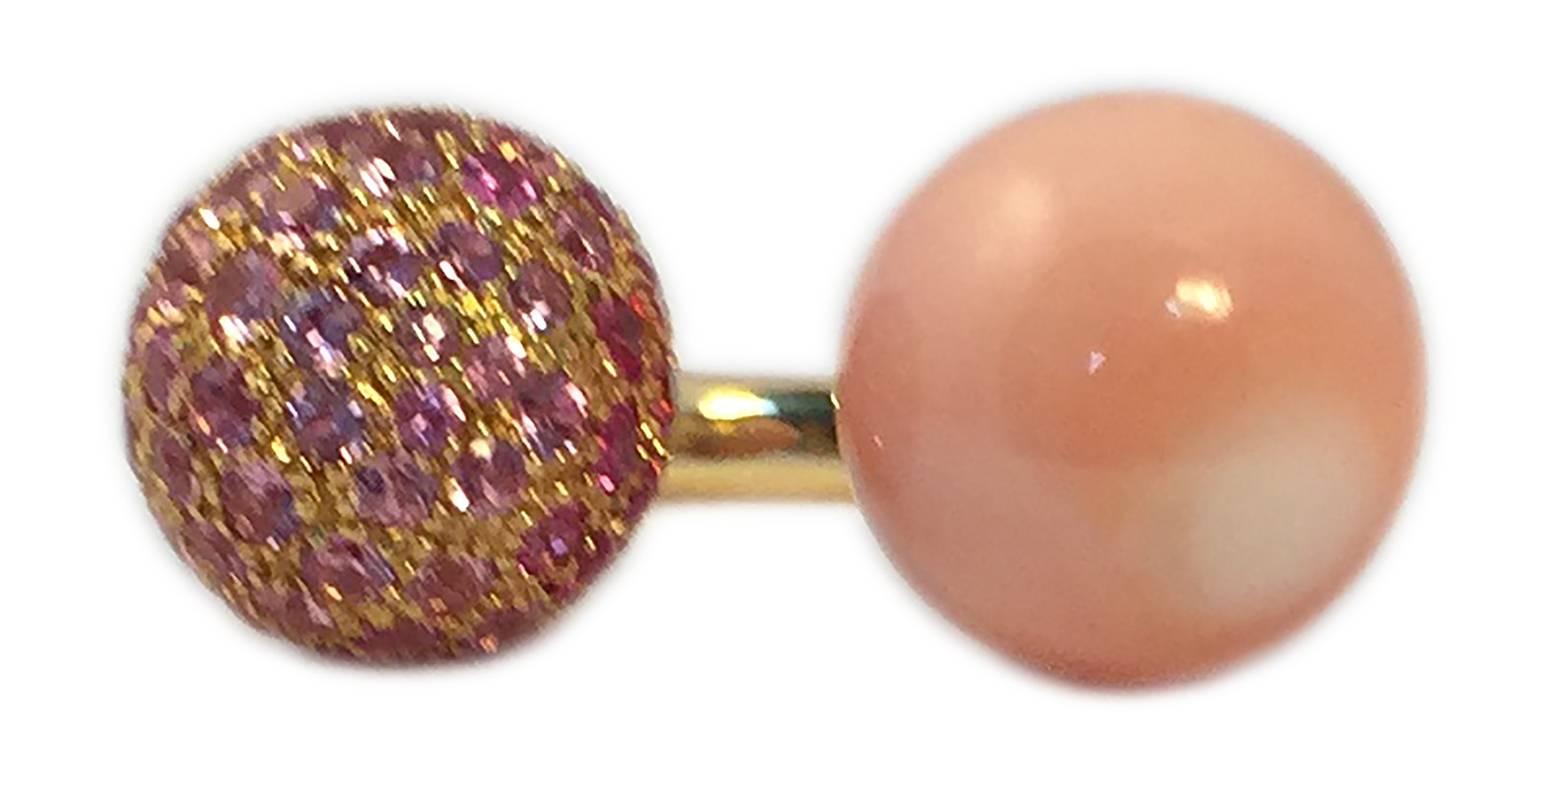 A chic and affordable “Toi et Moi’ ring by Capri jeweler Chantecler, with coral and pink sapphires. 18kt yellow gold mounting.